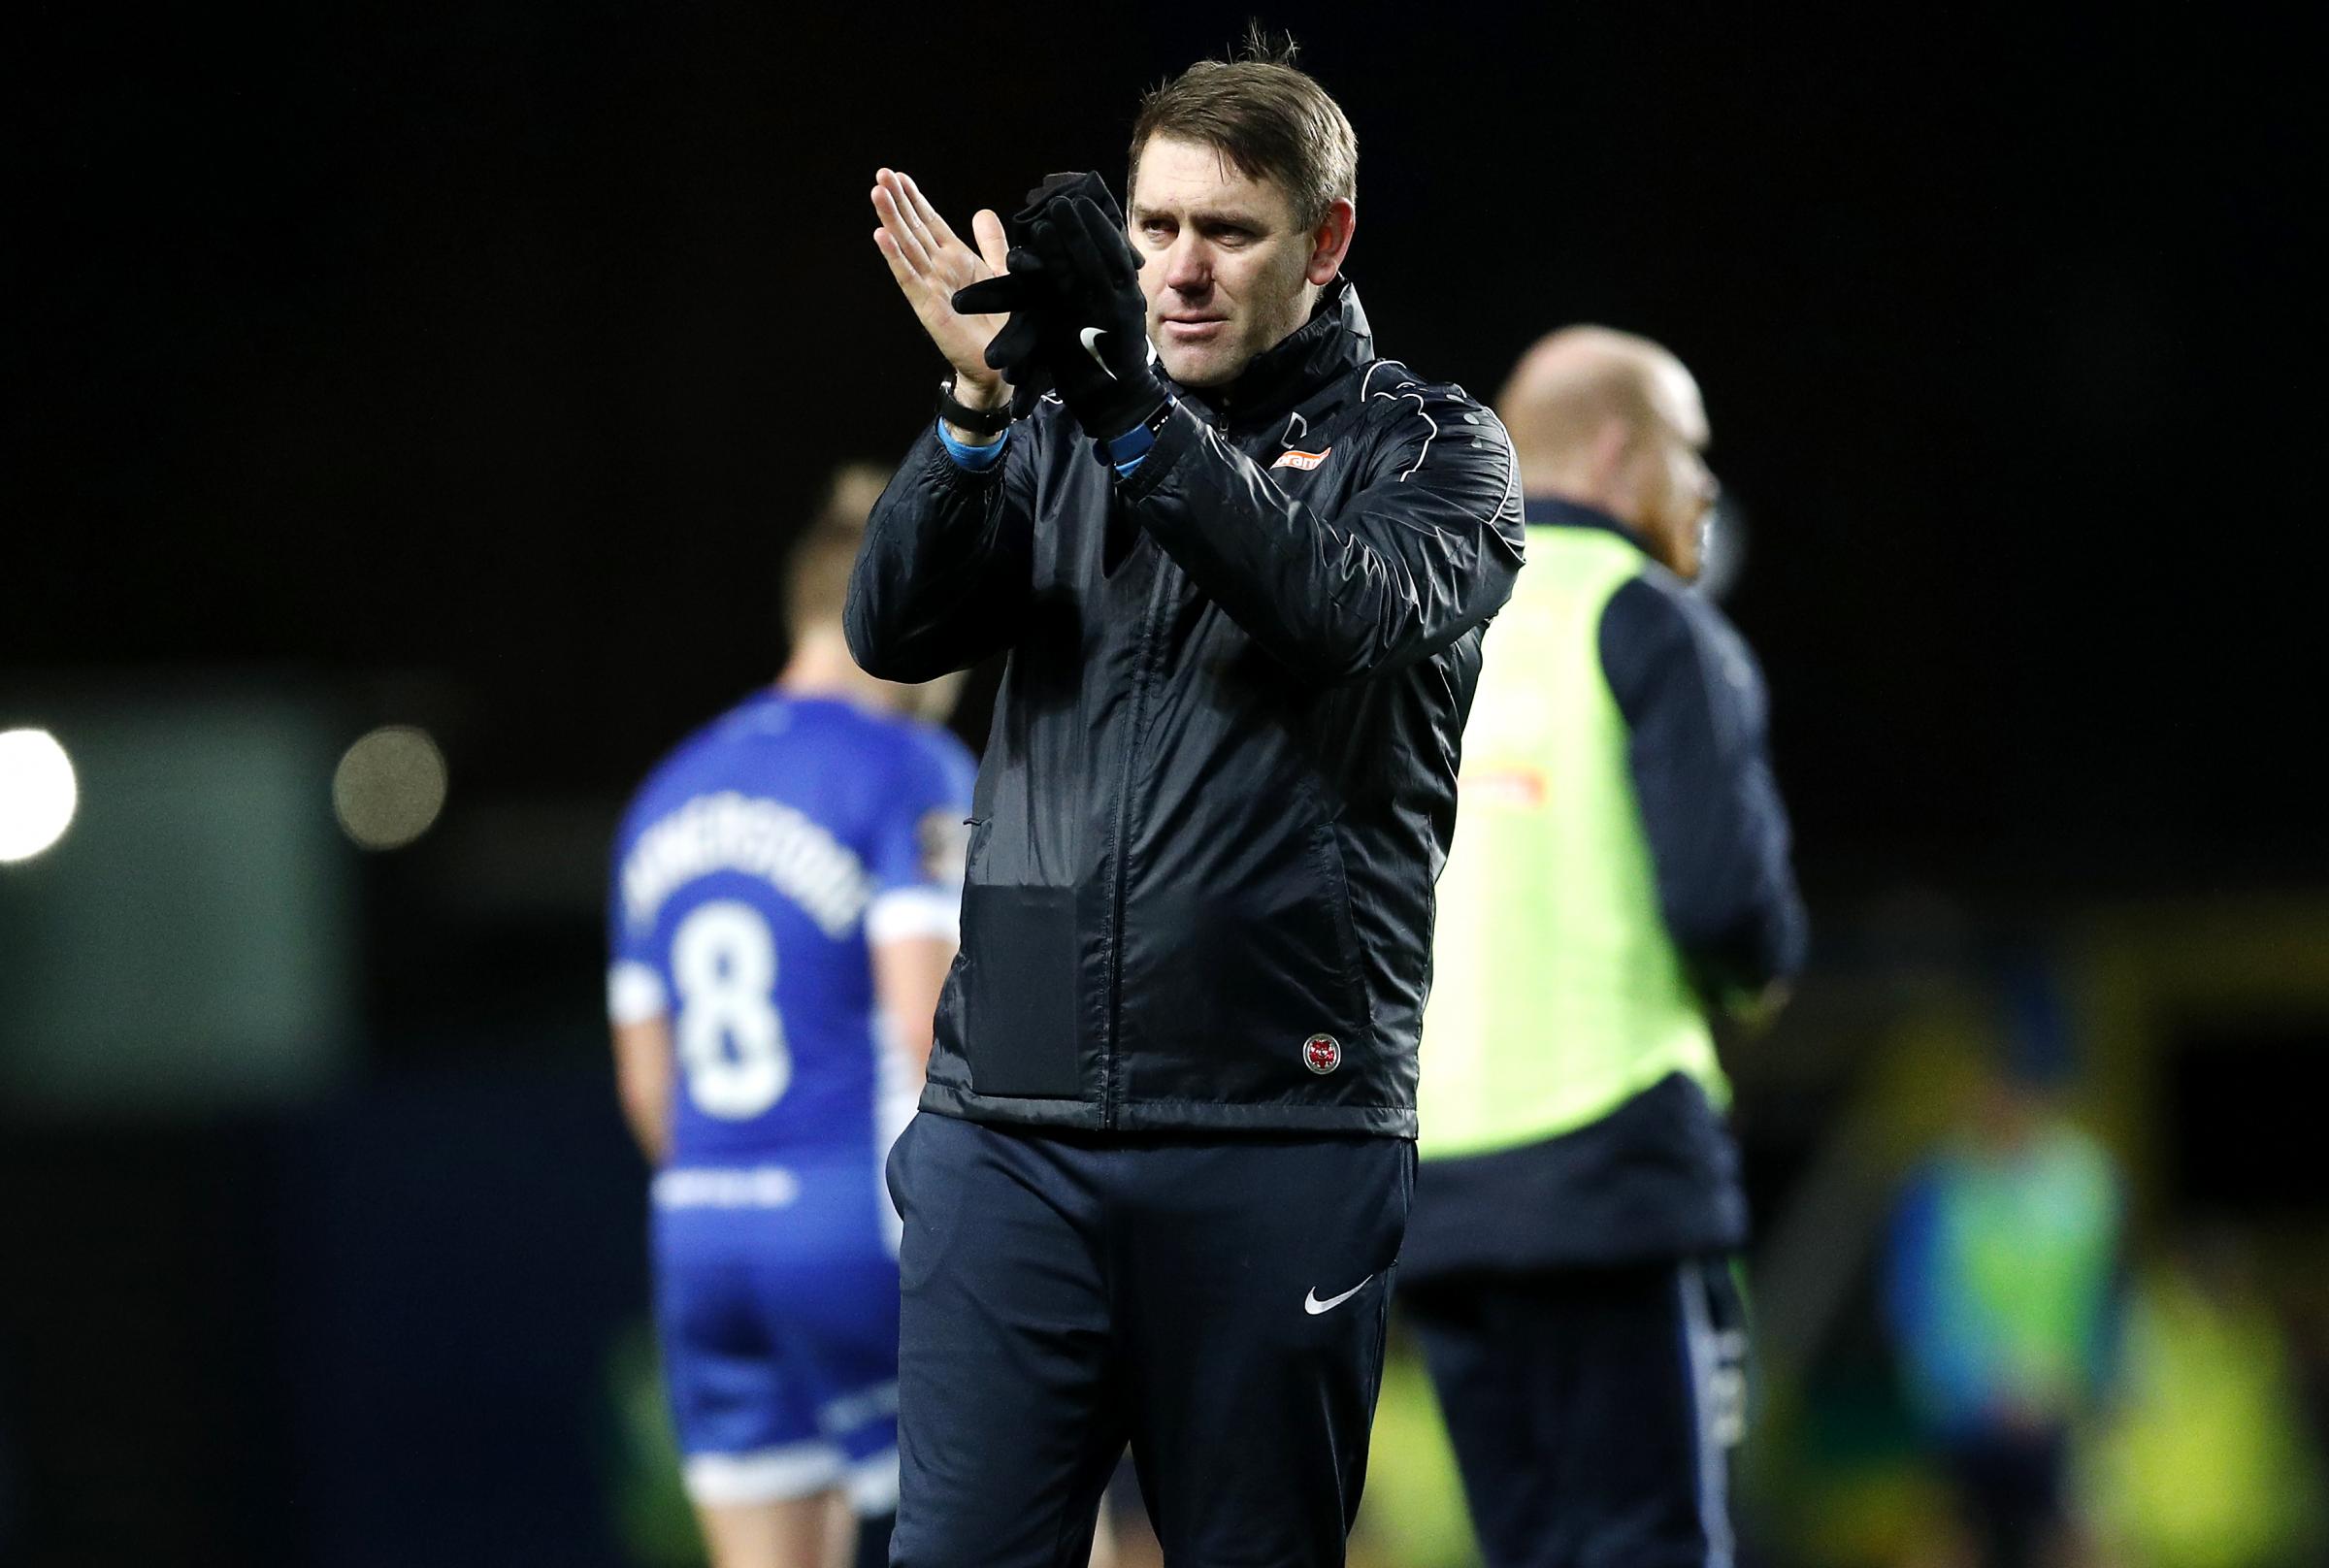 Stockport County boss Dave Challinor on Bolton Wanderers FA Cup clash